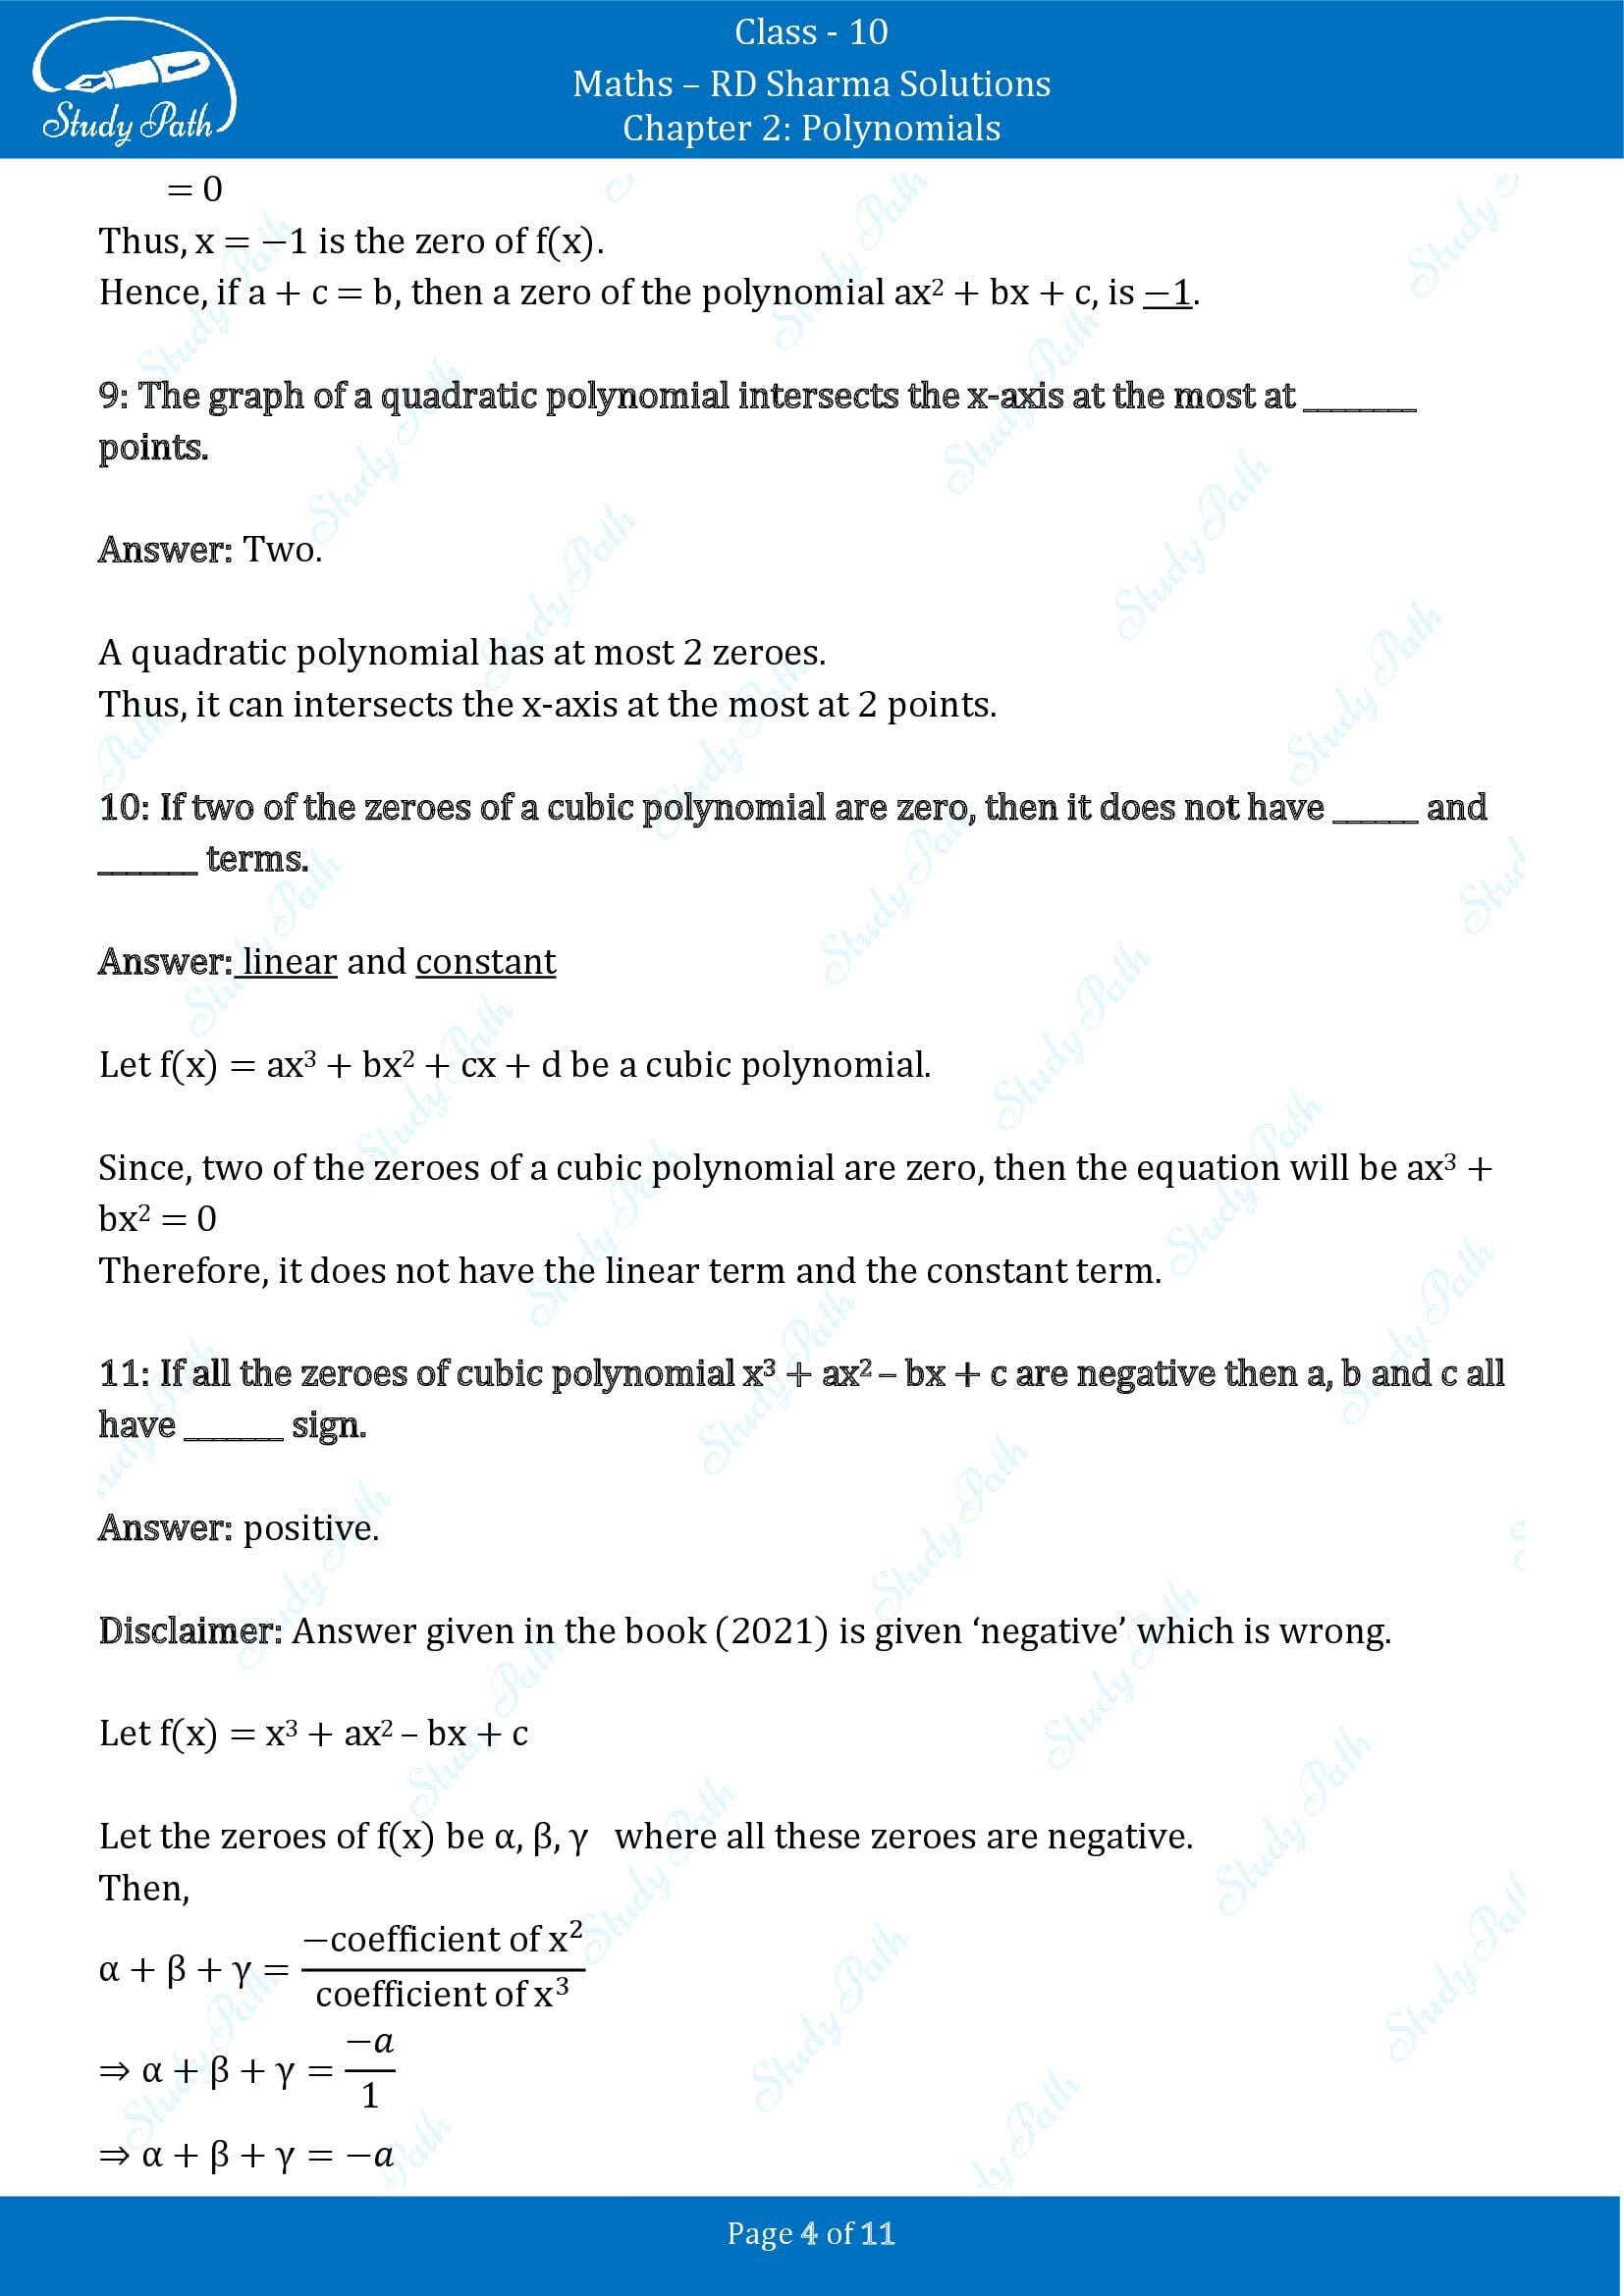 RD Sharma Solutions Class 10 Chapter 2 Polynomials Fill in the Blank Type Questions FBQs 00004